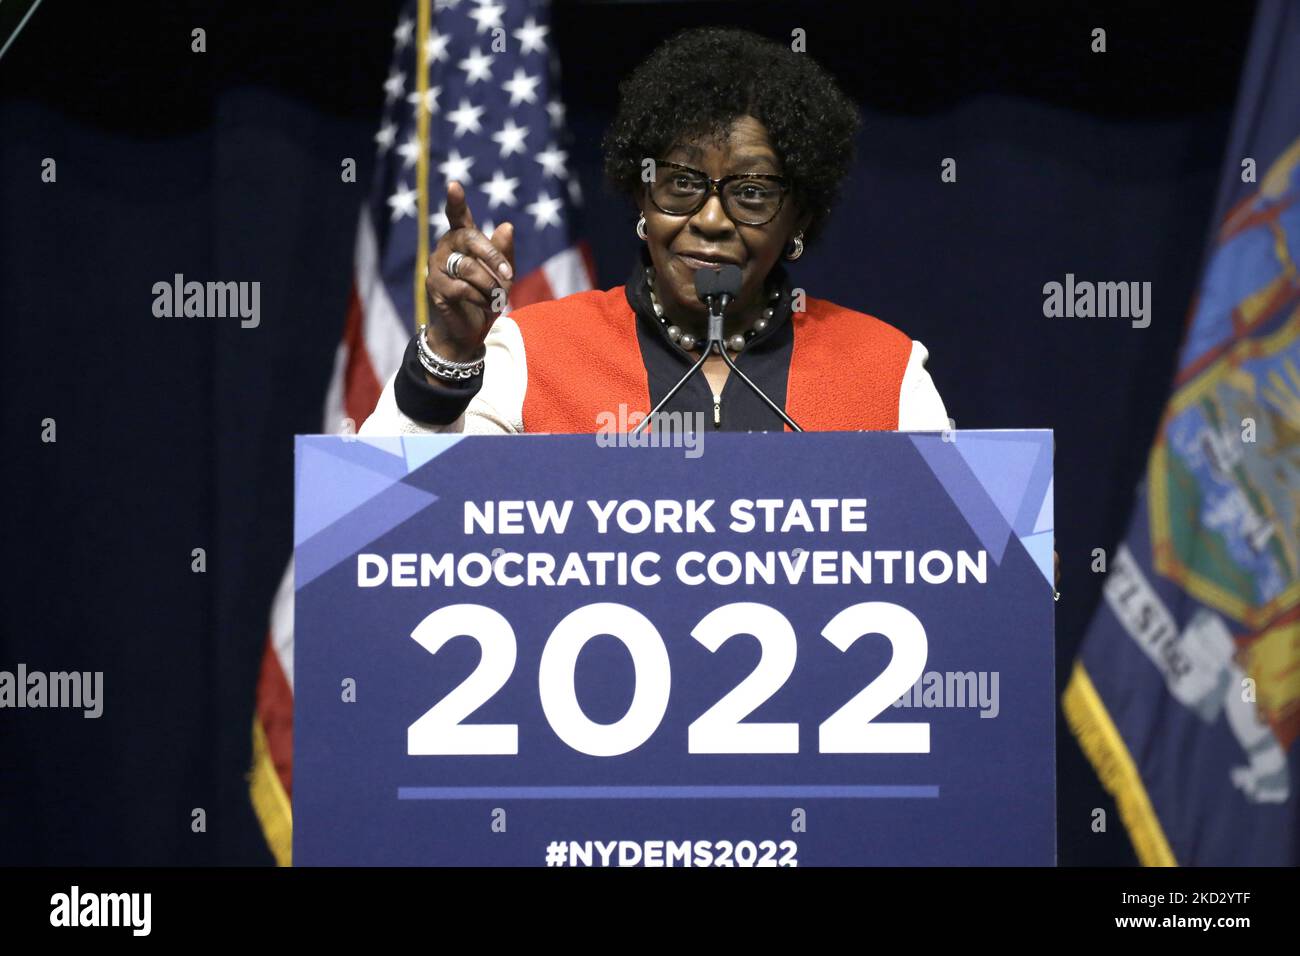 Kristen Stokes speaks during the 2022 New York State Democratic Convention at the Sheraton New York Times Square Hotel on February 17, 2022 in New York City. Former Secretary of State , Hillary Clinton introduced Kathy Hochul as the nominee for Governor of New York State. Hochul along with Lt. Governor Brian Benjamin and others nominated for statewide offices will be on the ballot this year the year of midterm elections. (Photo by John Lamparski/NurPhoto) Stock Photo